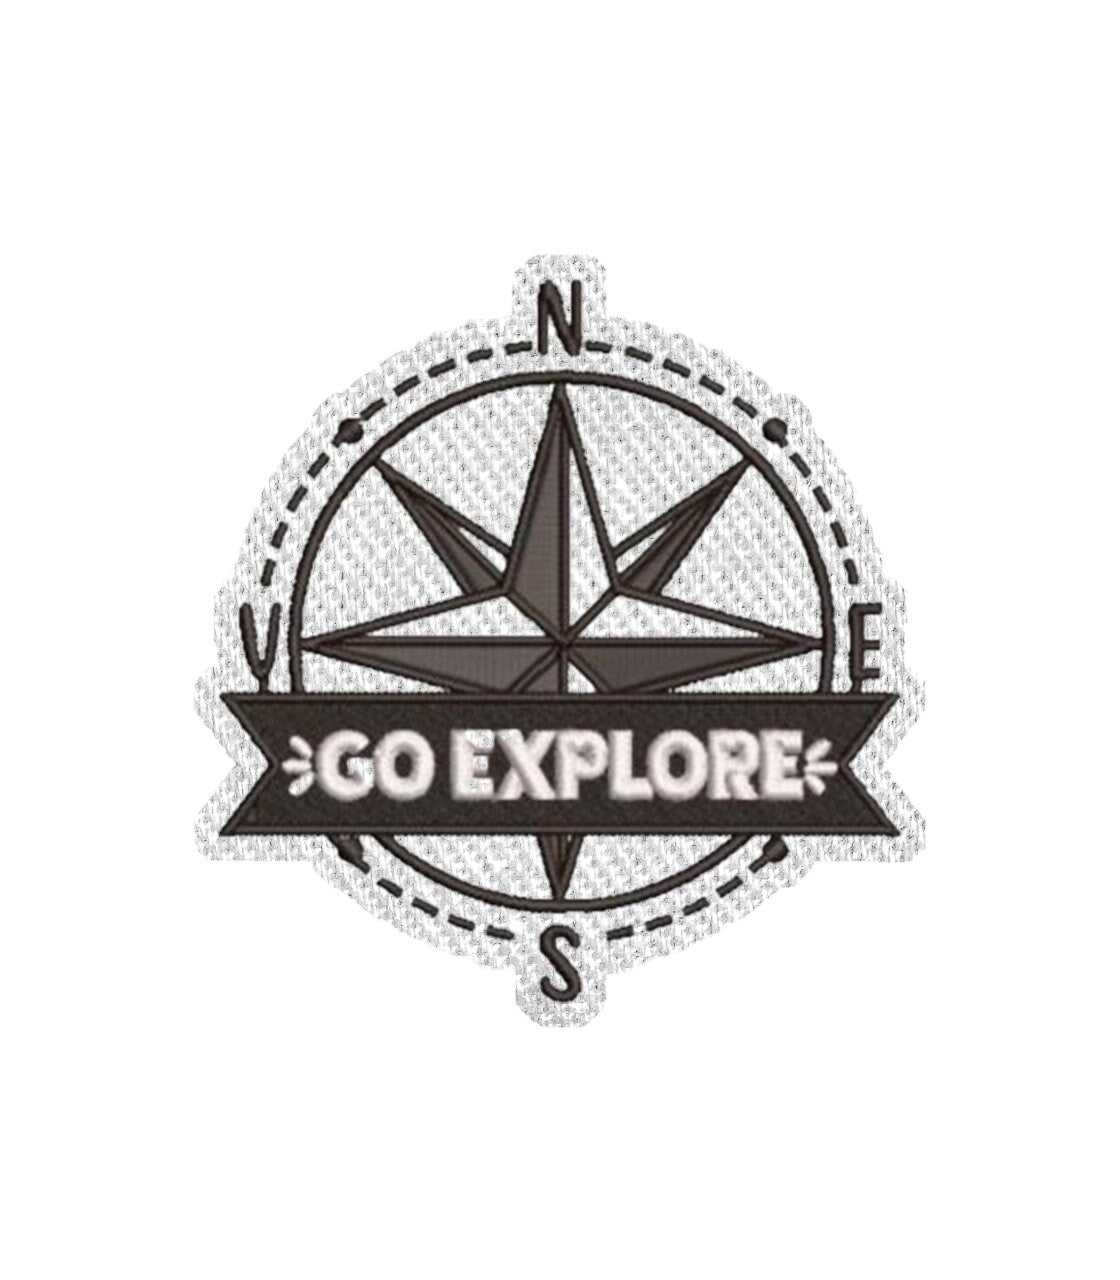 Go Explore Compass Iron on Patch /Sew on embroidered patch - Travel Season Holiday Embroidery Women Applique Merit Badge for Clothing Jacket